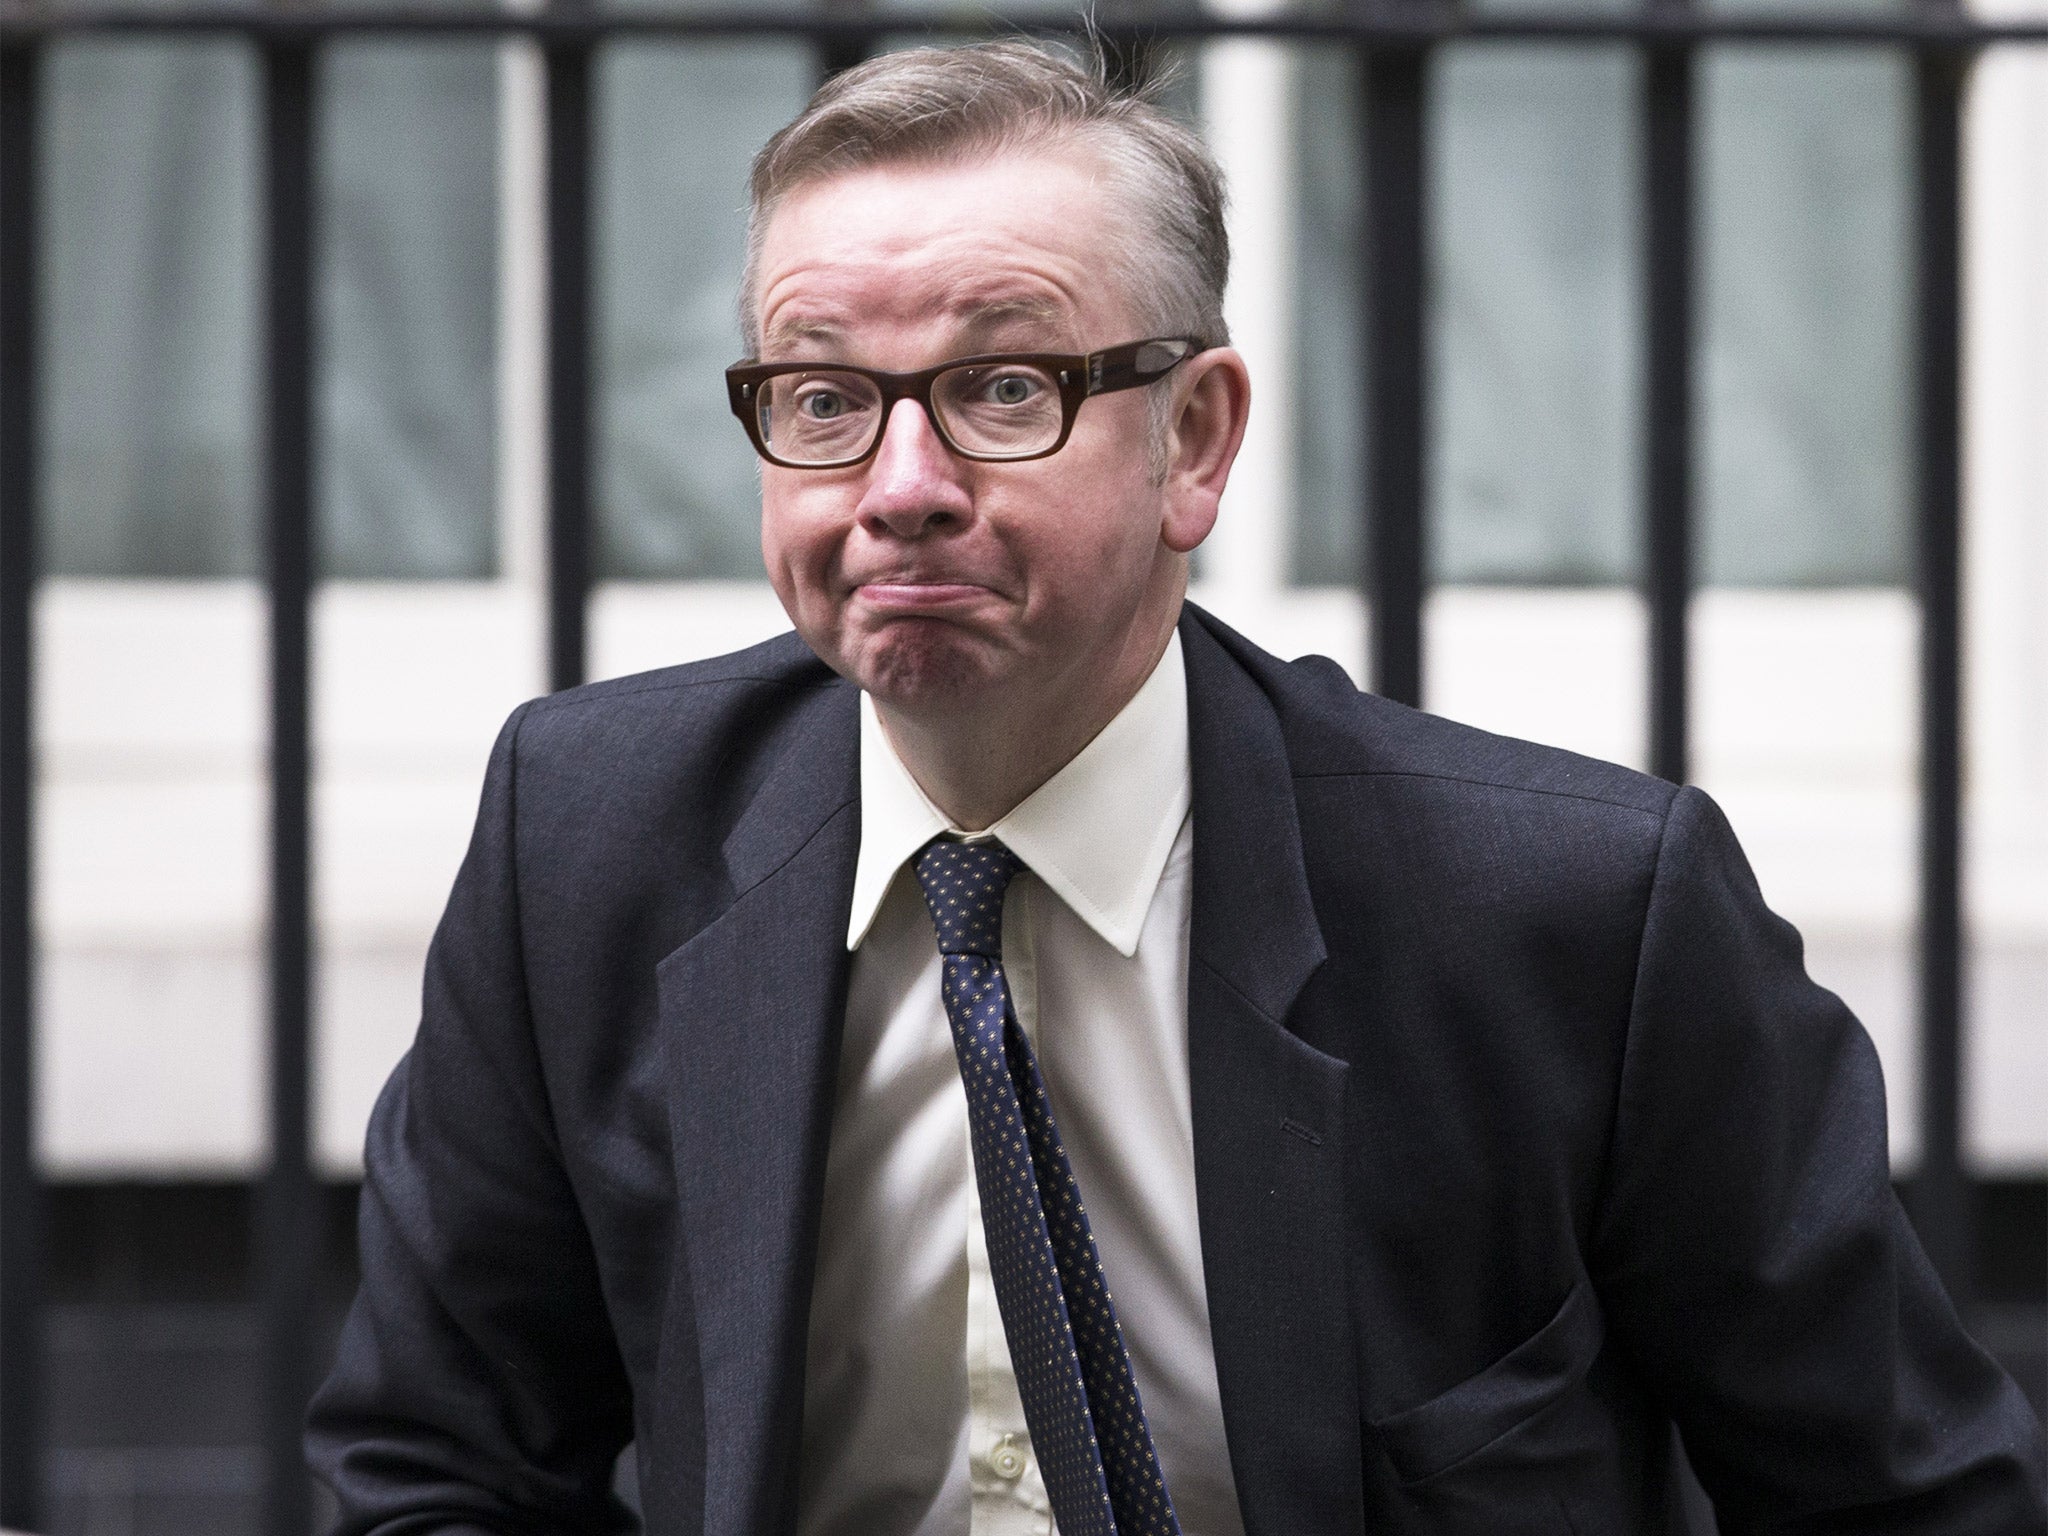 Michael Gove, the new Justice Secretary, will be driving the Tories’ attempts to scrap the Human Rights Act